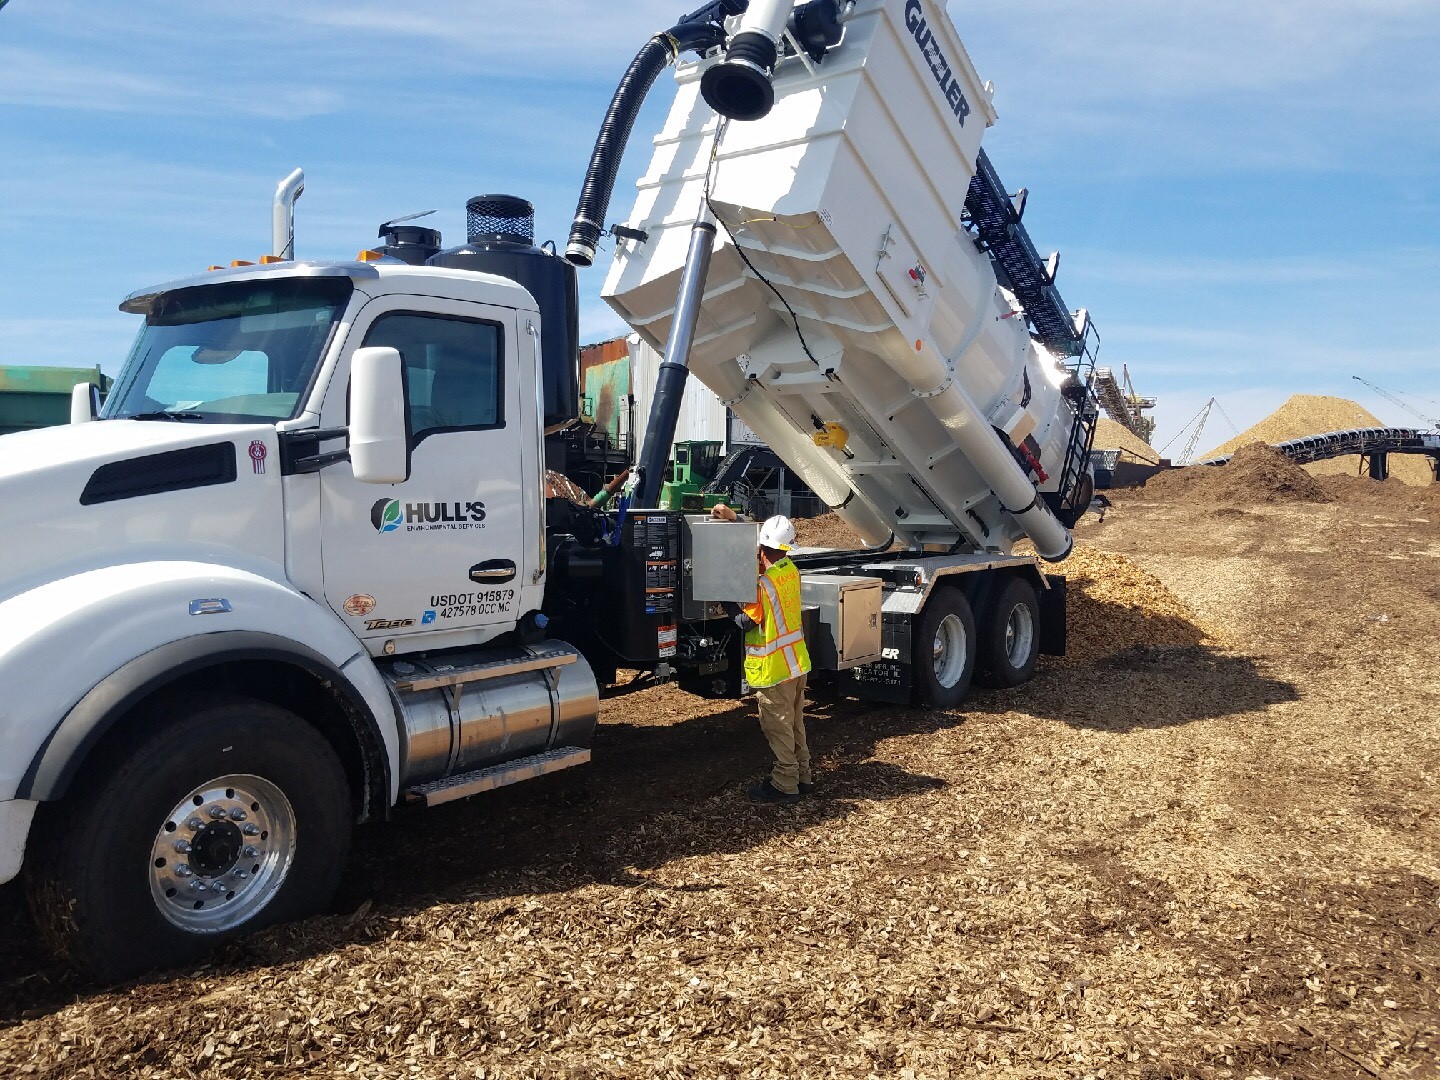 Hull's new industrial loader vacuum system demonstrates its ability to vacuum remove a variety of substances and subsequently dump that material with ease.